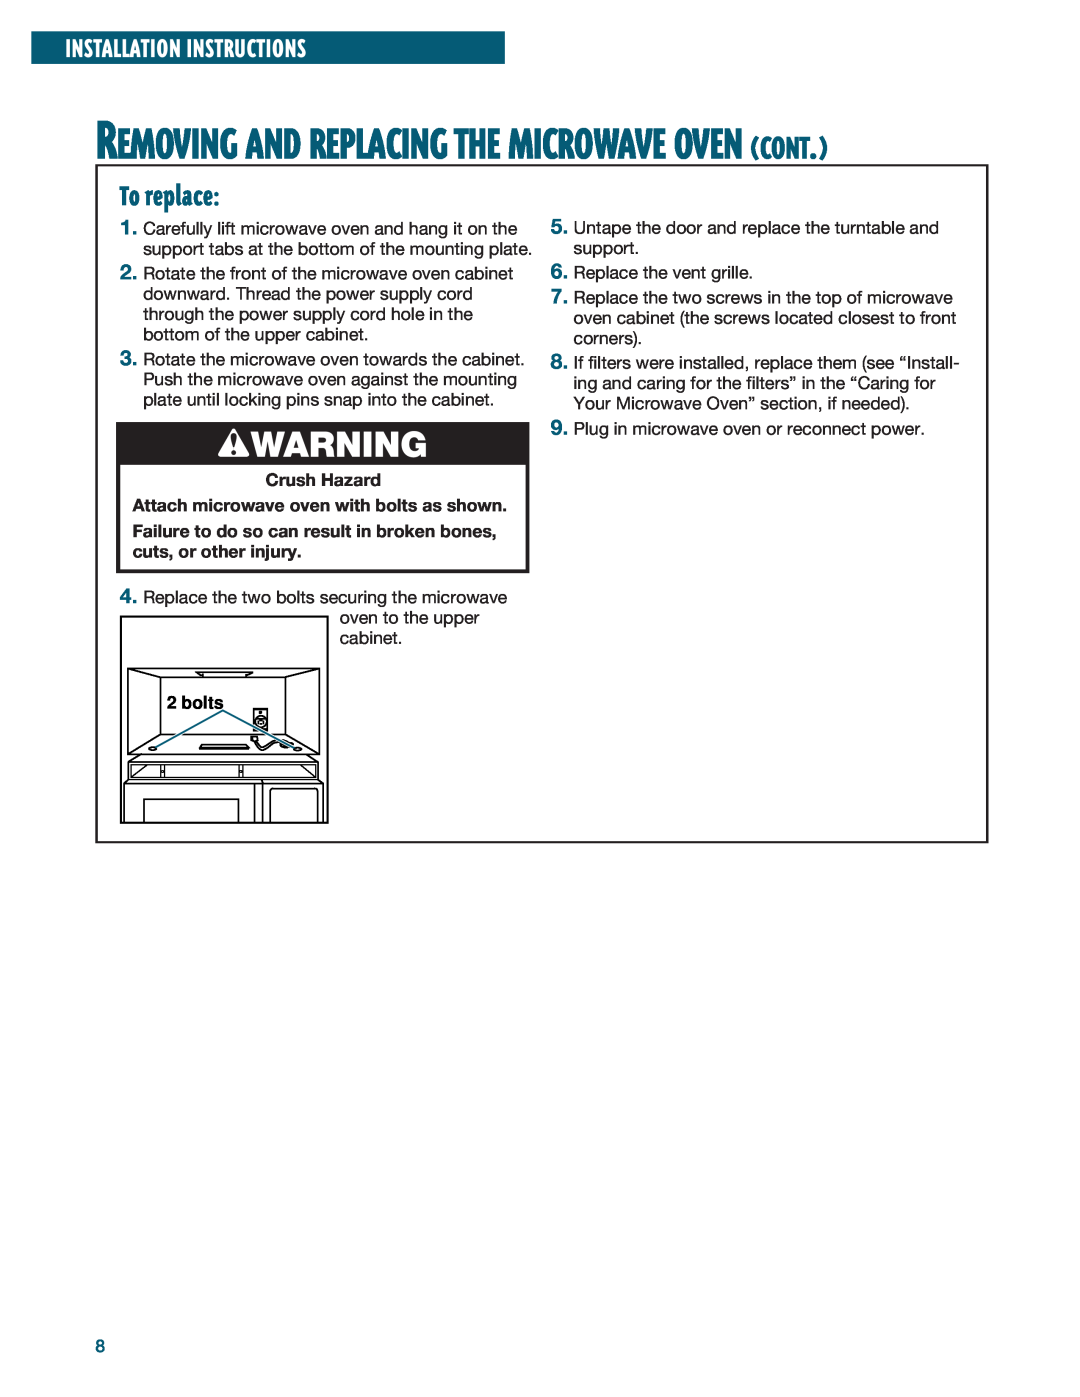 Whirlpool MH6140XF To replace, bolts, wWARNING, Removing And Replacing The Microwave Oven Cont, Installation Instructions 